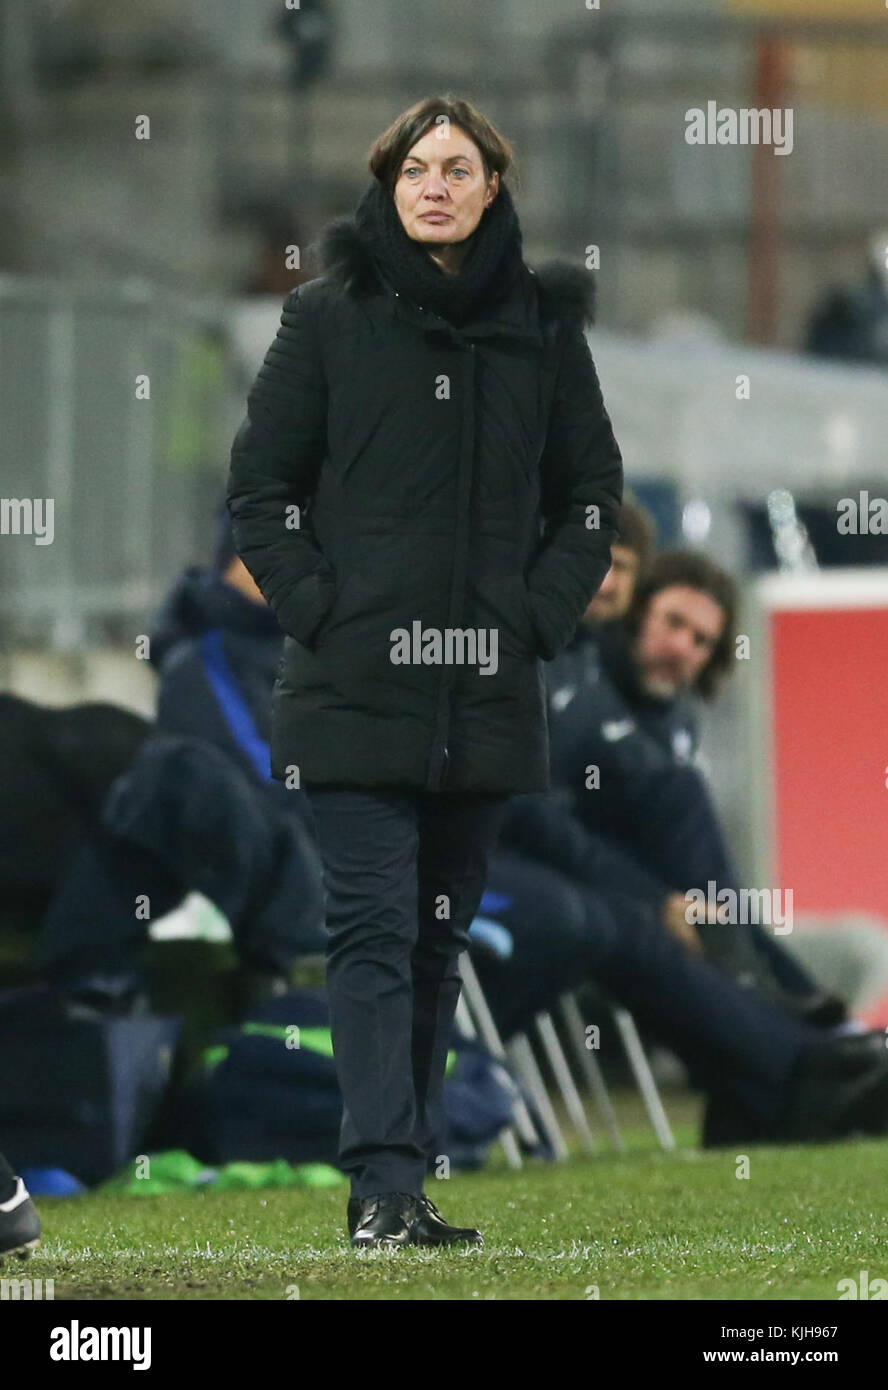 Bielefeld, Germany. 24th Nov, 2017. France's coach Corinne Diacre reacts during the women's international friendly soccer match between Germany and France in the Schueco Arena stadium in Bielefeld, Germany, 24 November 2017. Credit: Friso Gentsch/dpa/Alamy Live News Stock Photo